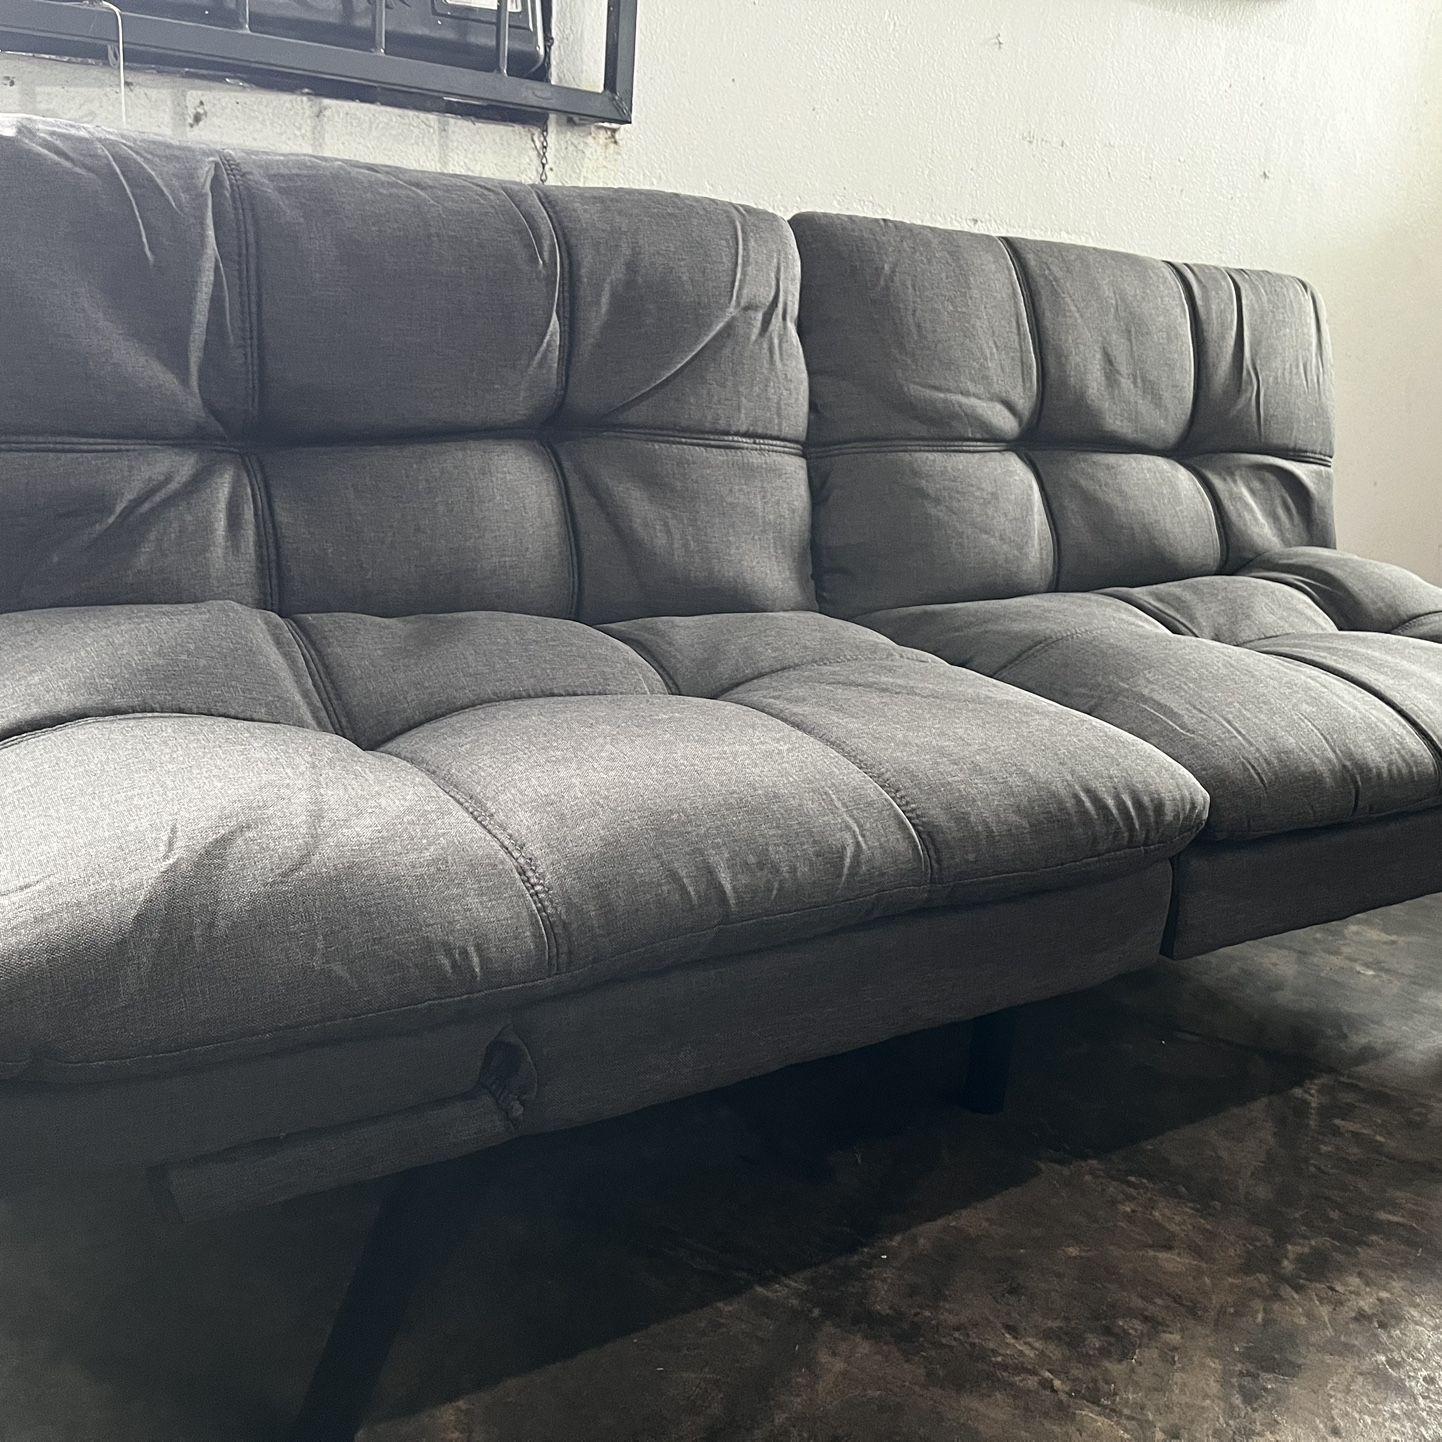 New Multifunctional Futon / Sofa On Clearance Sale ✅ Financing Available Only $39 ✅